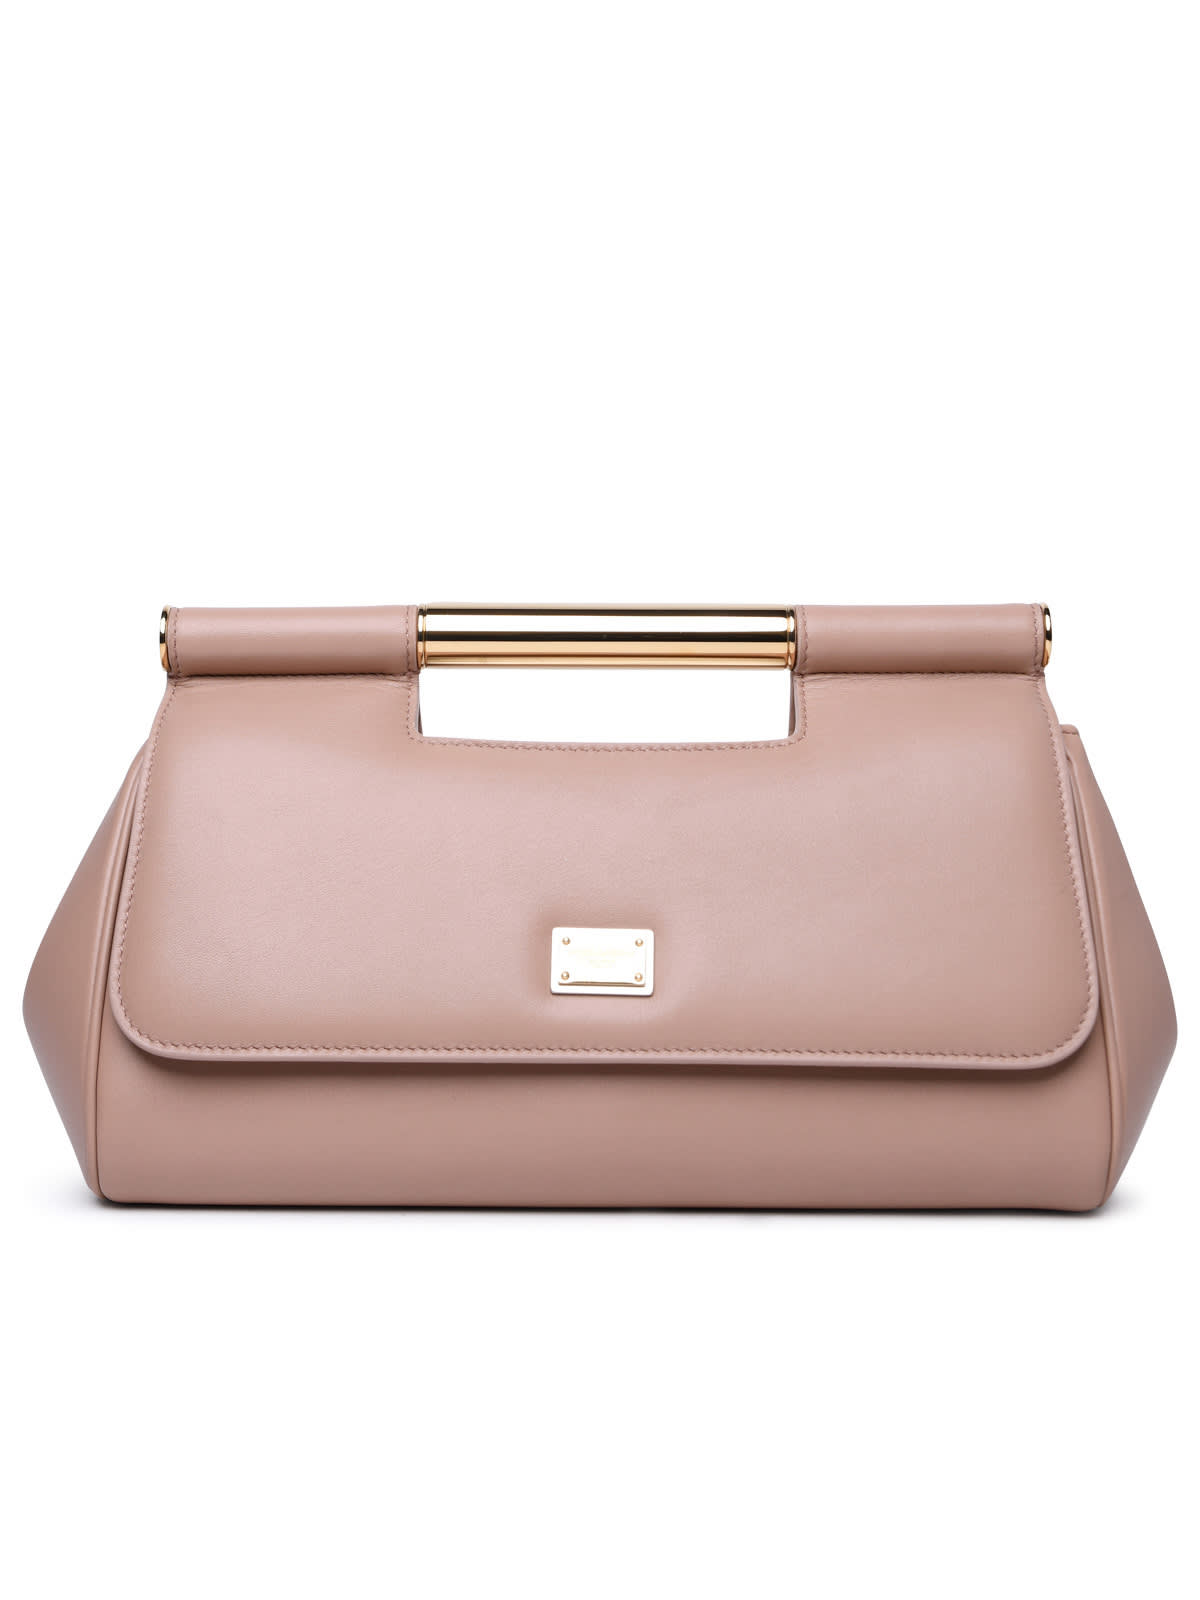 DOLCE & GABBANA SICILY LARGE LEATHER CLUTCH NUDE